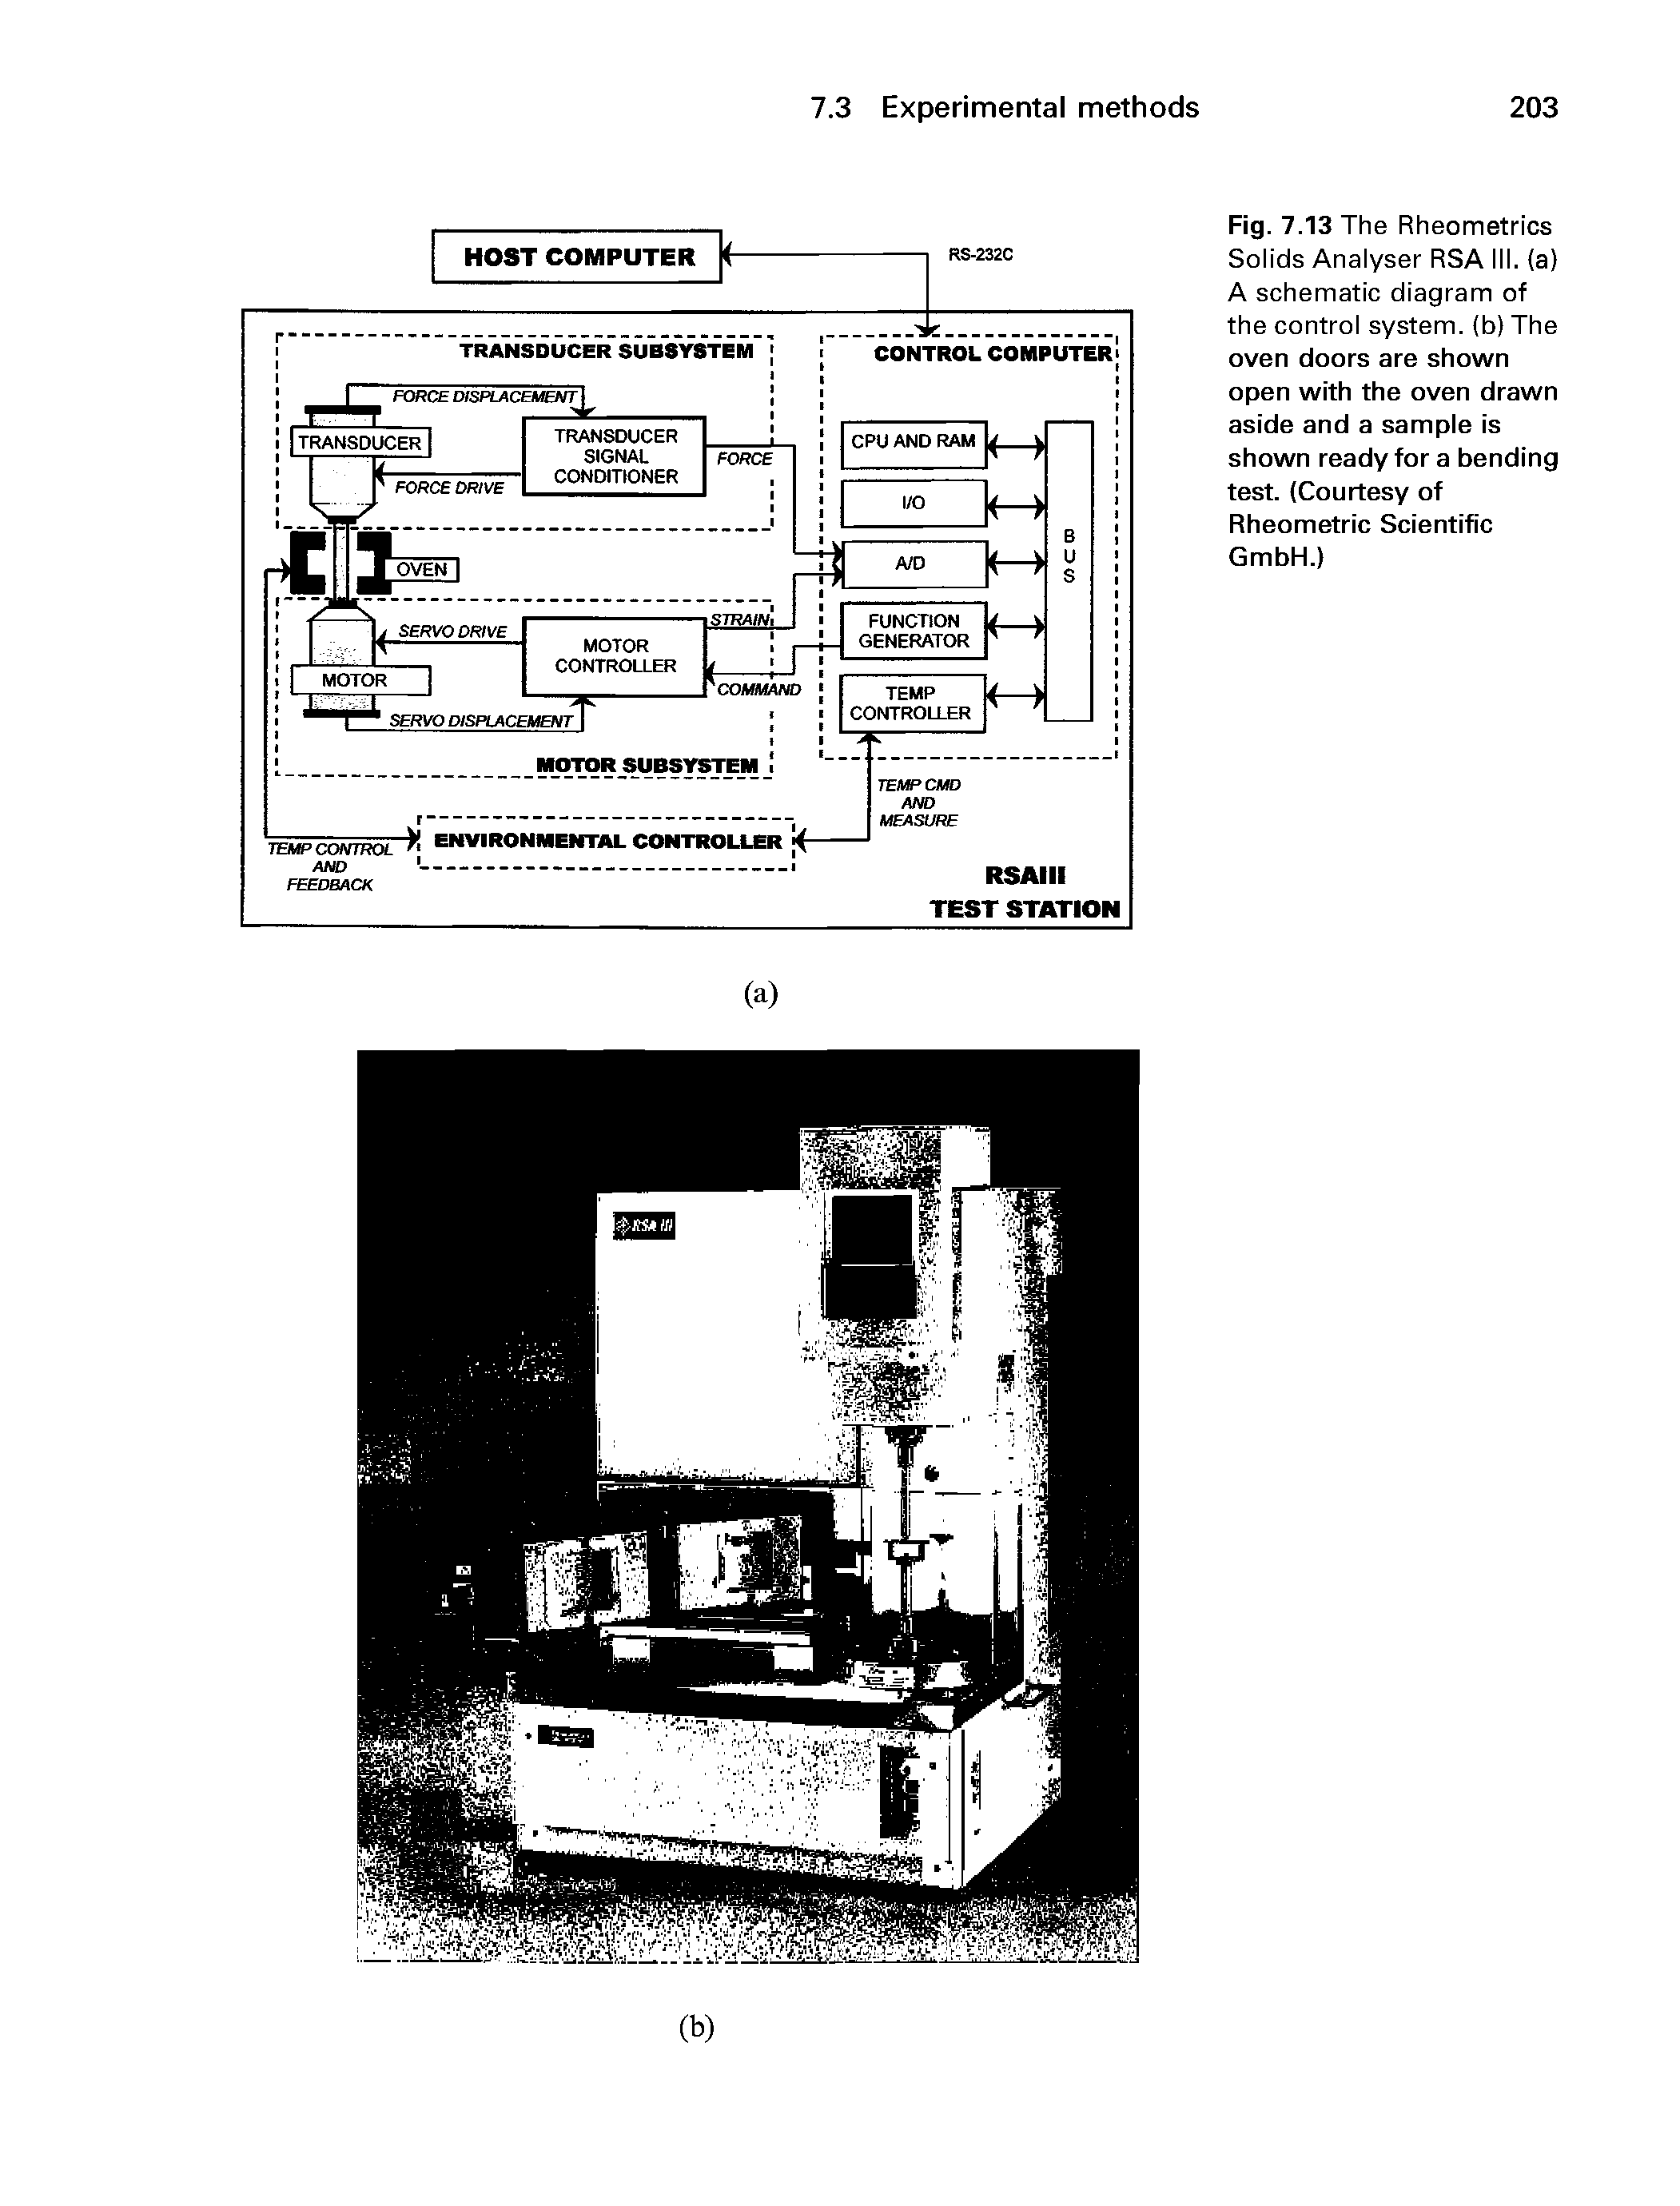 Fig. 7.13 The Rheometrics Solids Analyser RSA III. (a) A schematic diagram of the control system, (b) The oven doors are shown open with the oven drawn aside and a sample is shown ready for a bending test. (Courtesy of Rheometric Scientific GmbH.)...